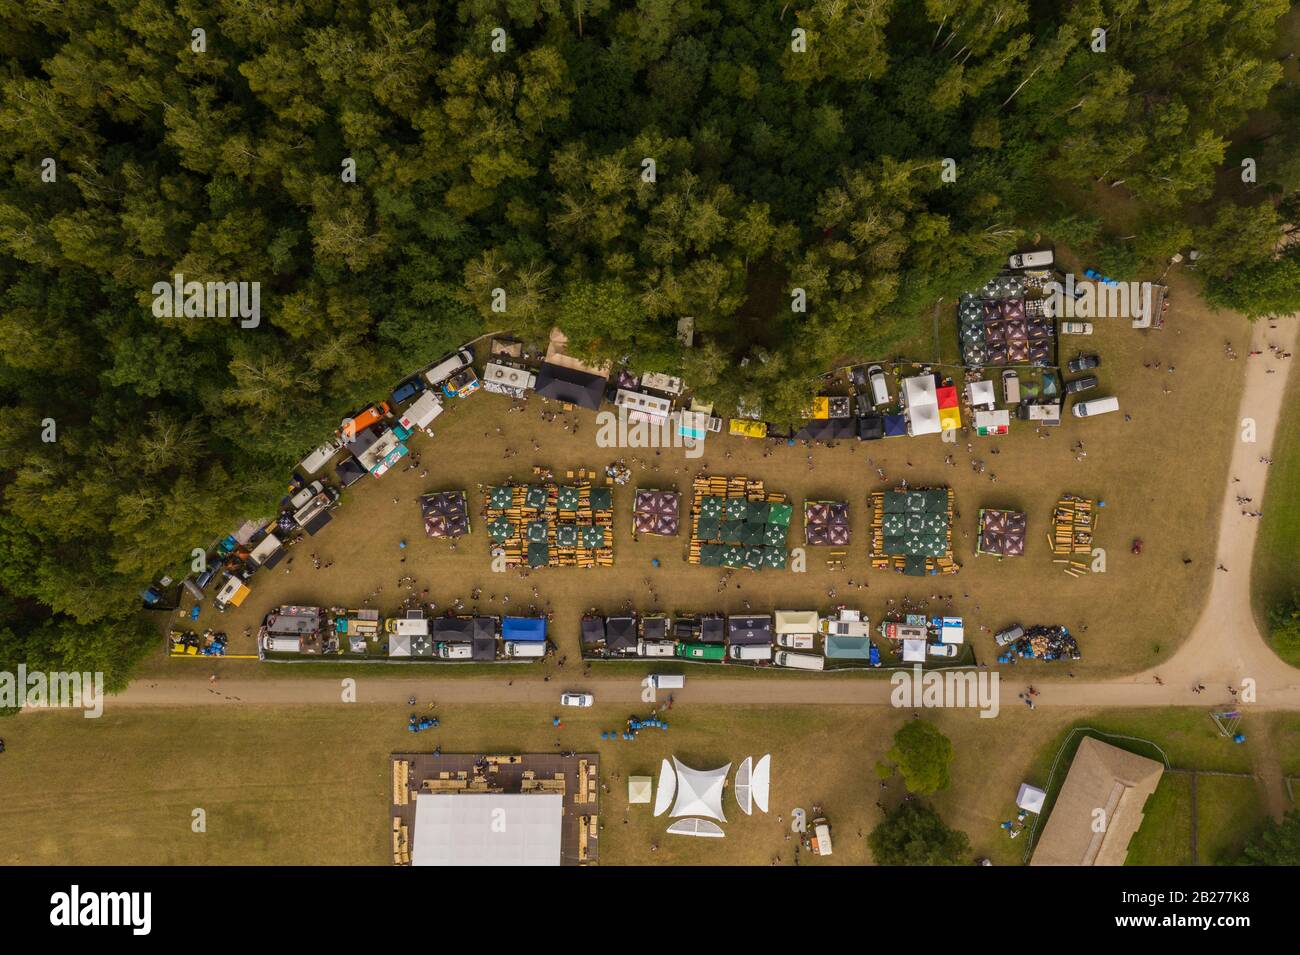 Drone photography of food stalls during music festival Stock Photo - Alamy